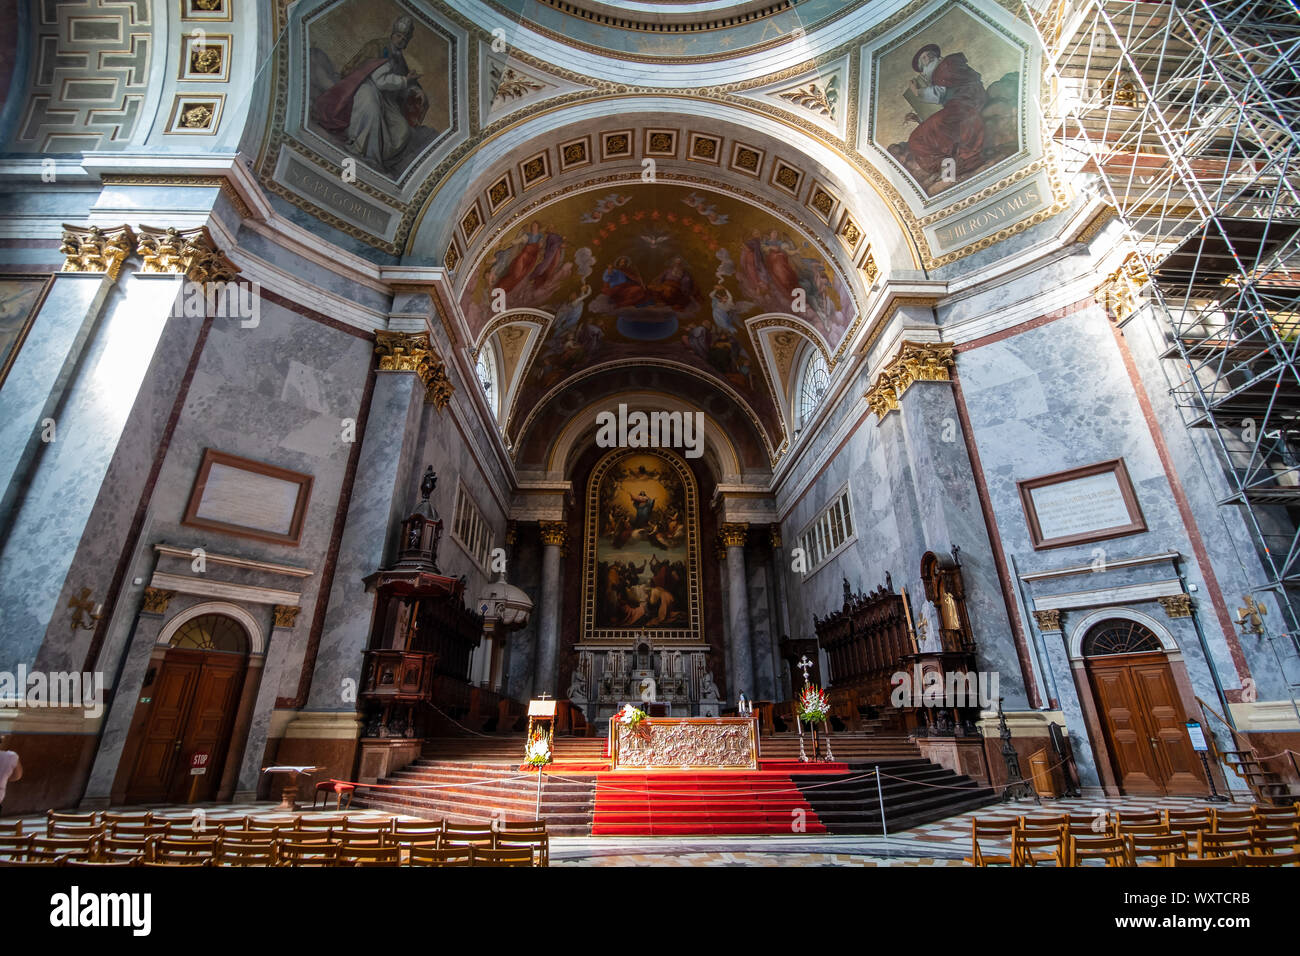 ESZTERGOM, HUNGARY - AUGUST 20, 2019: The Primatial Basilica of the Blessed Virgin Mary Assumed Into Heaven and St Adalbert. Temple interior Stock Photo